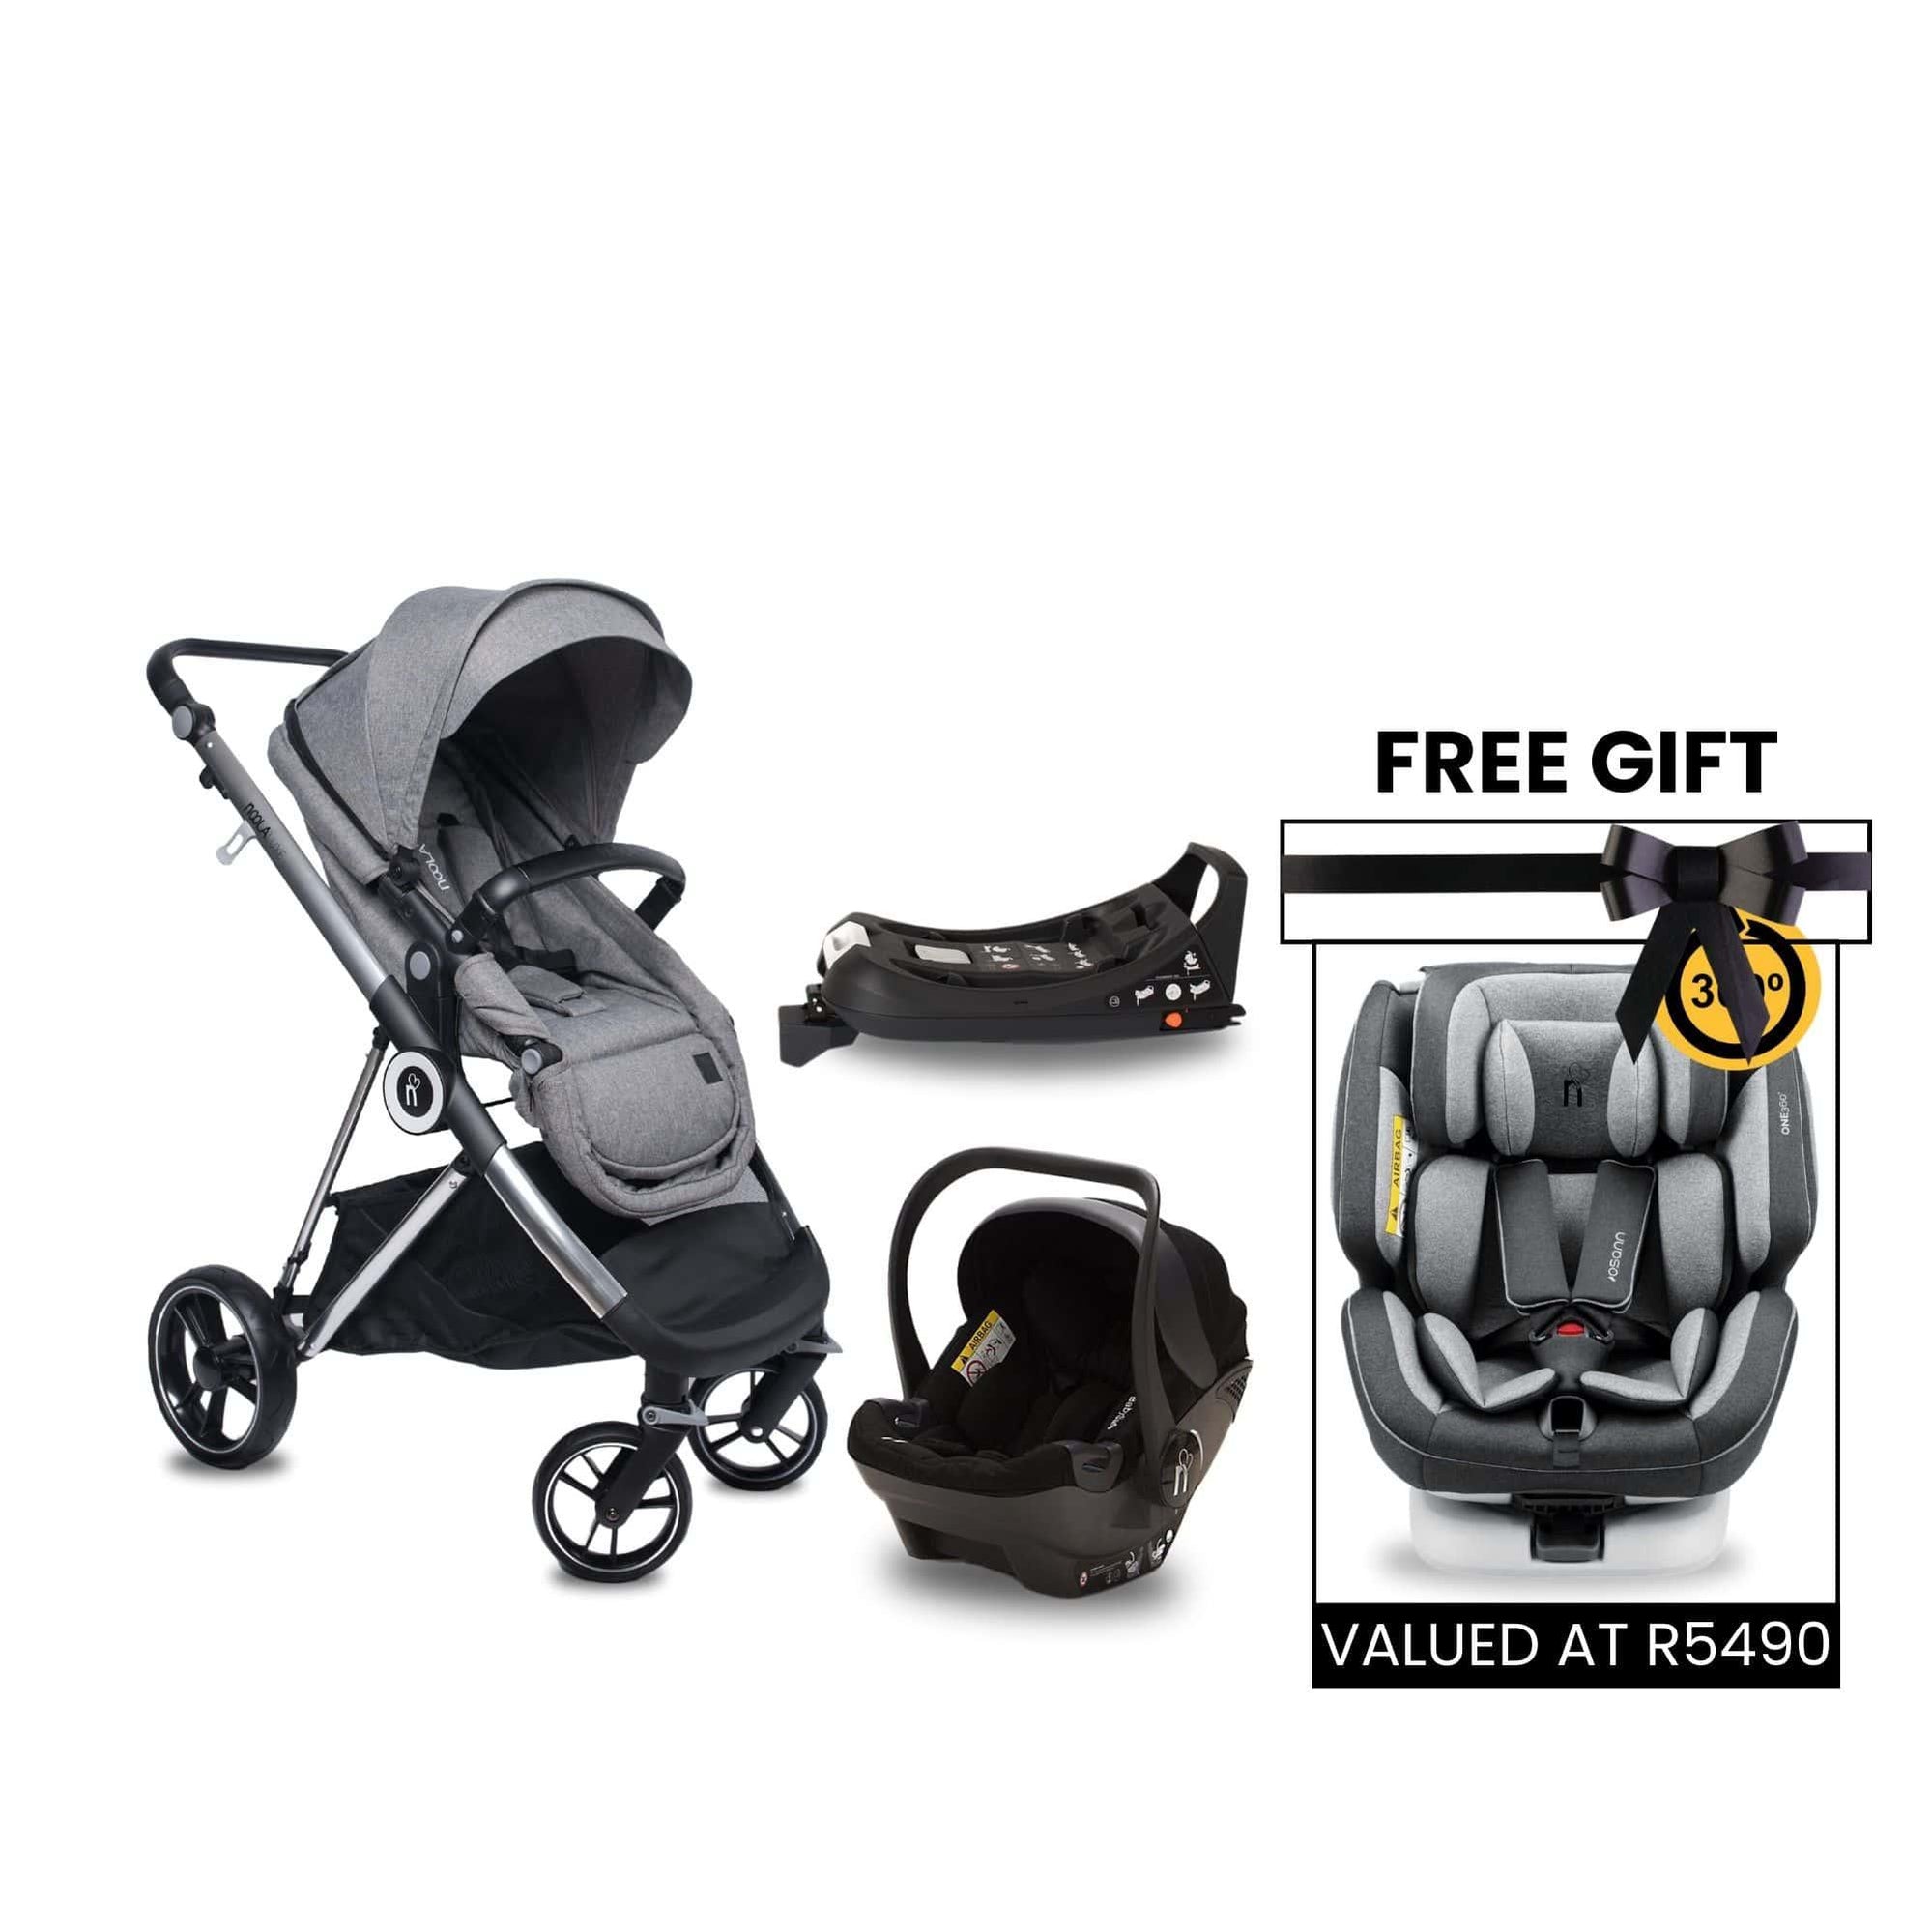 noola luxe 5in1 baby stroller lunar grey #SELECT THE COLOUR OF YOUR ONE360_ONE360 | LUNAR GREY